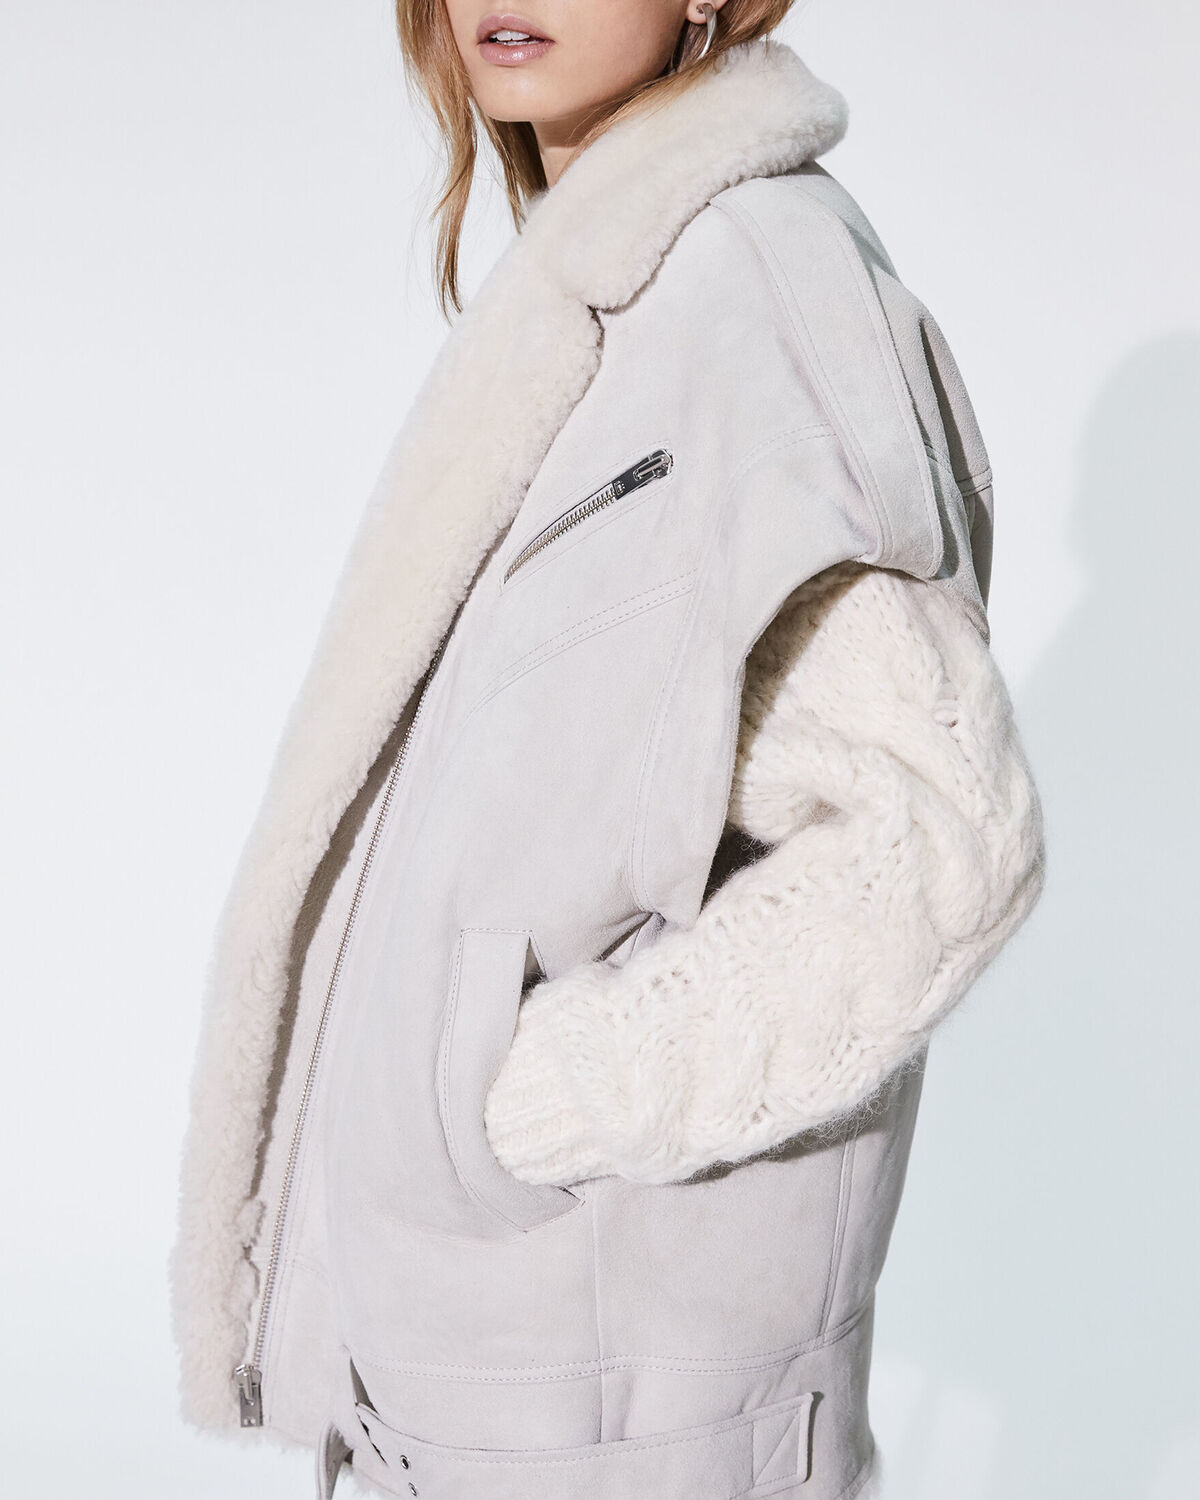 Photo of IRO Paris Corcova Woolskin Off White - This Beige Sleeveless Shearling Jacket Is An Essential Part Of Your Wardrobe This Winter. Wear It Open With Boots And A Flowery Dress For A Bohemian-chic Look. Fall Winter 19